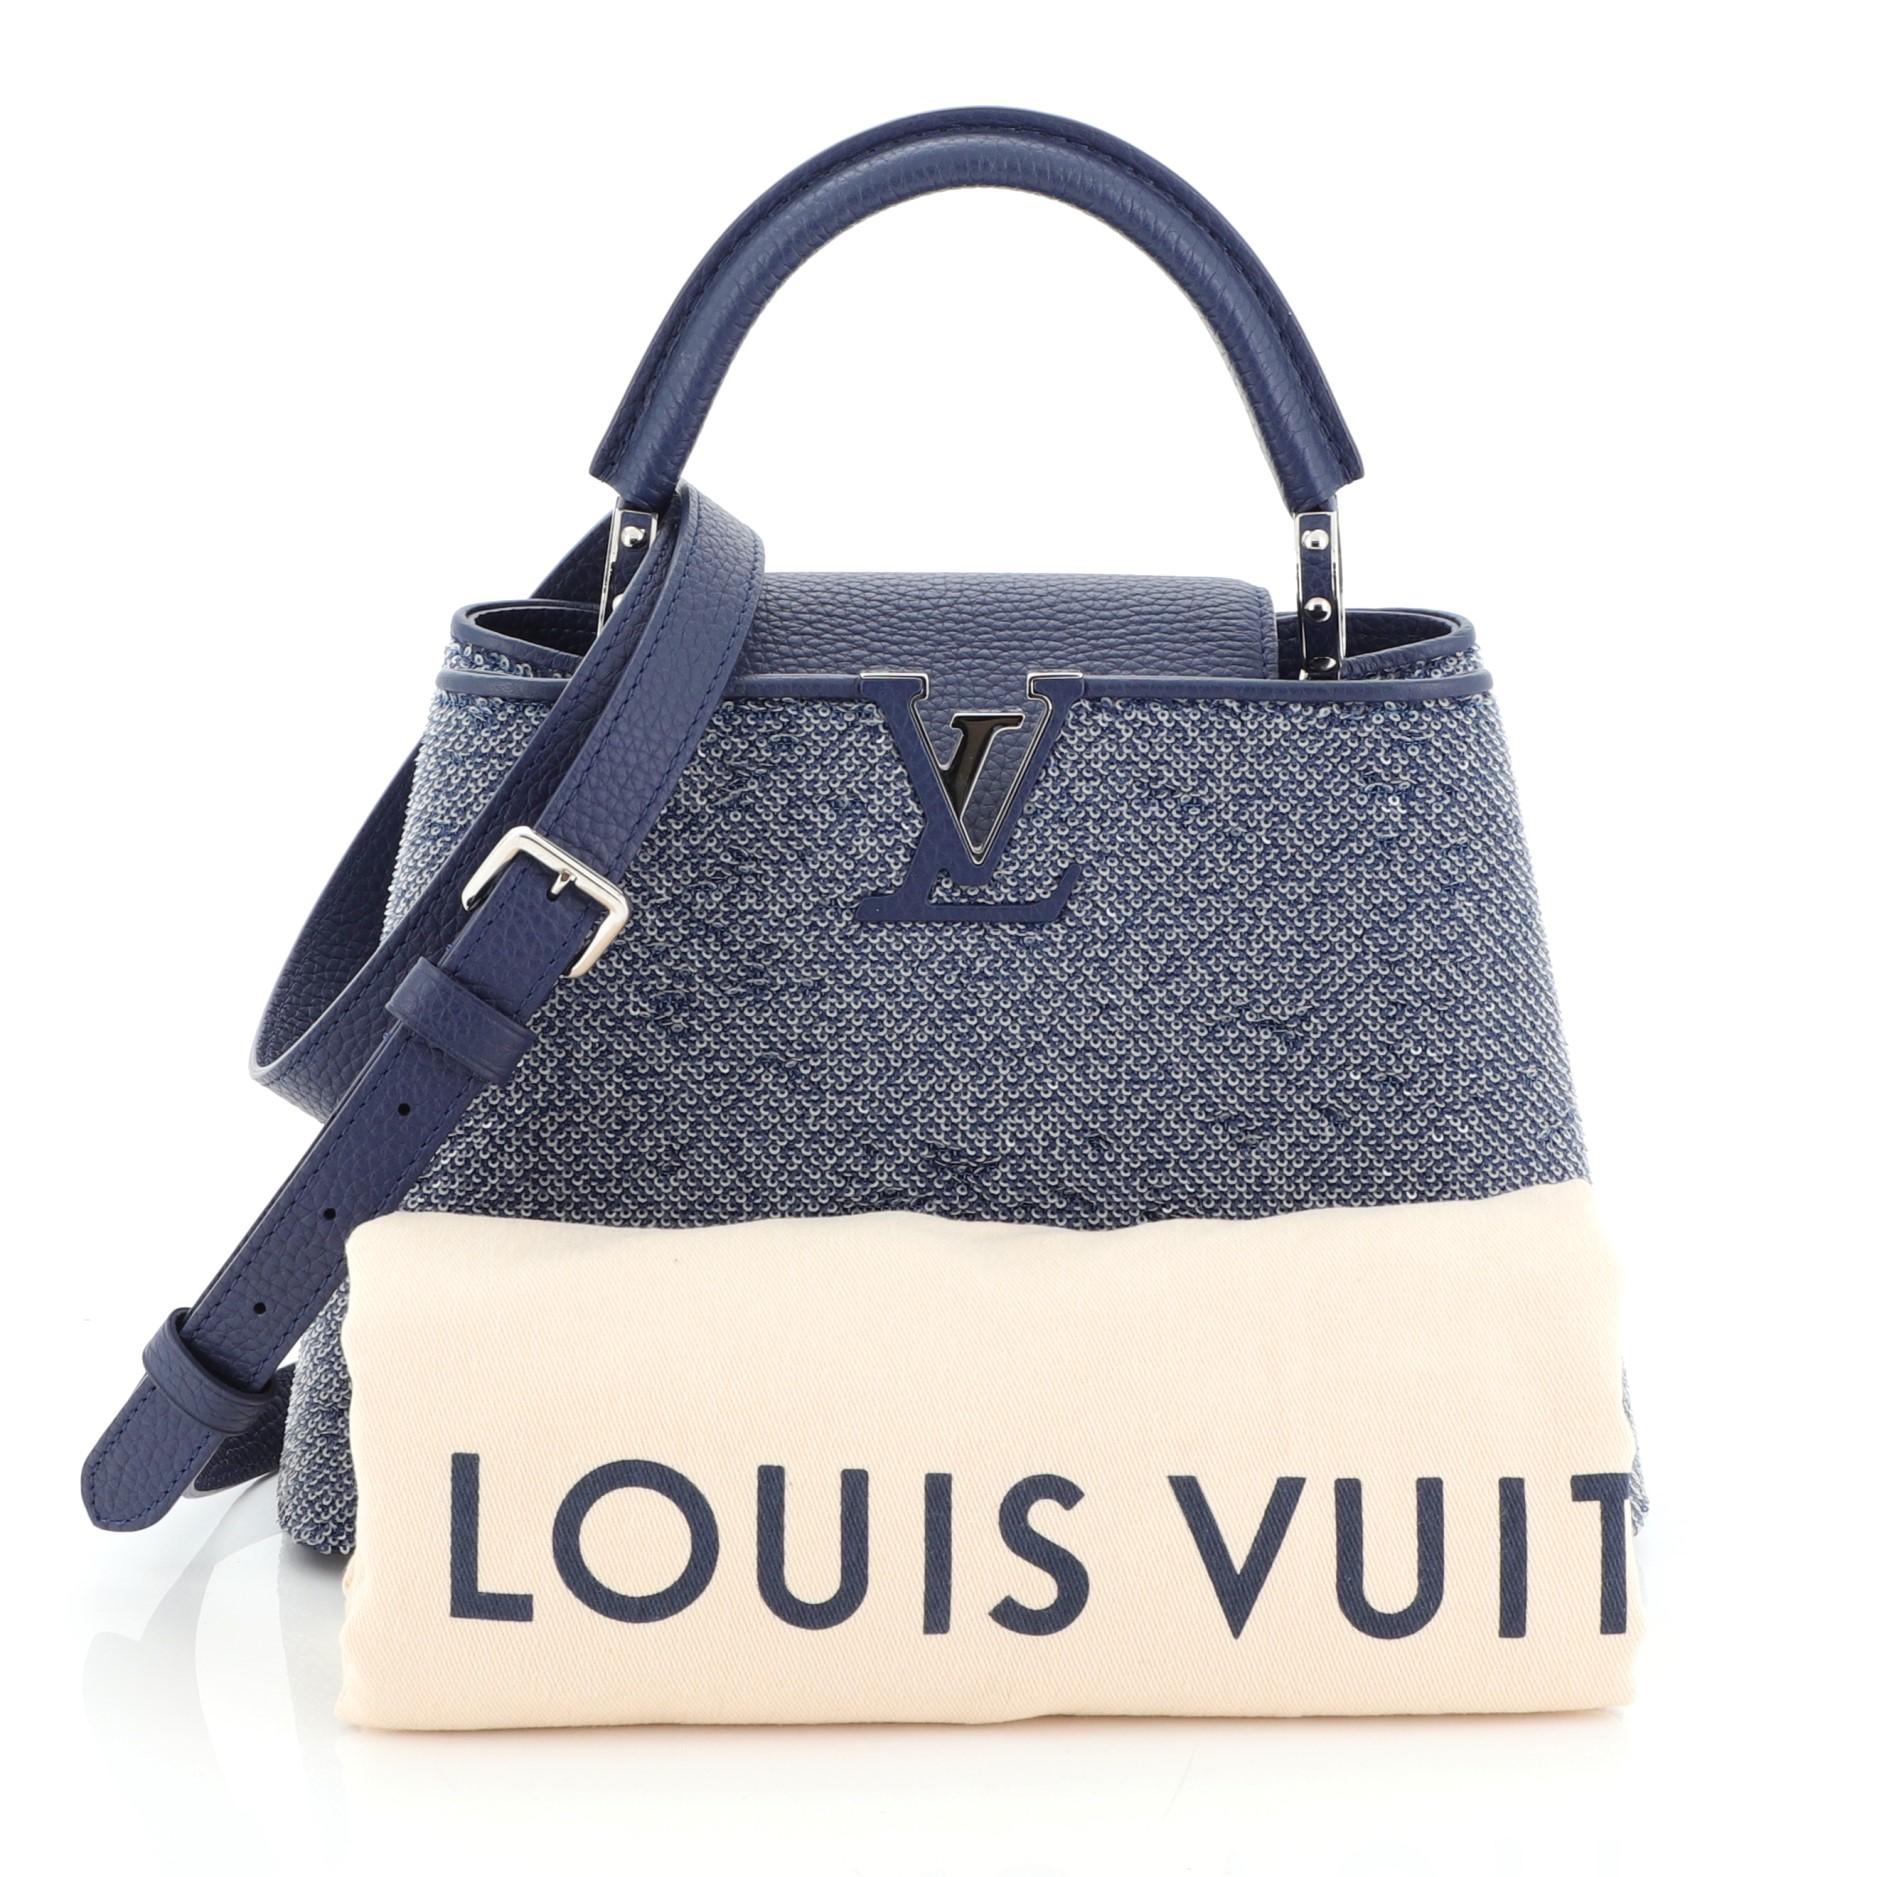 This Louis Vuitton Capucines Handbag Sequins BB, crafted from blue sequins, features a single rolled leather handle secured by jewel-like rings, frontal flap with classic monogram flower, and silver-tone hardware. It opens to a blue leather interior